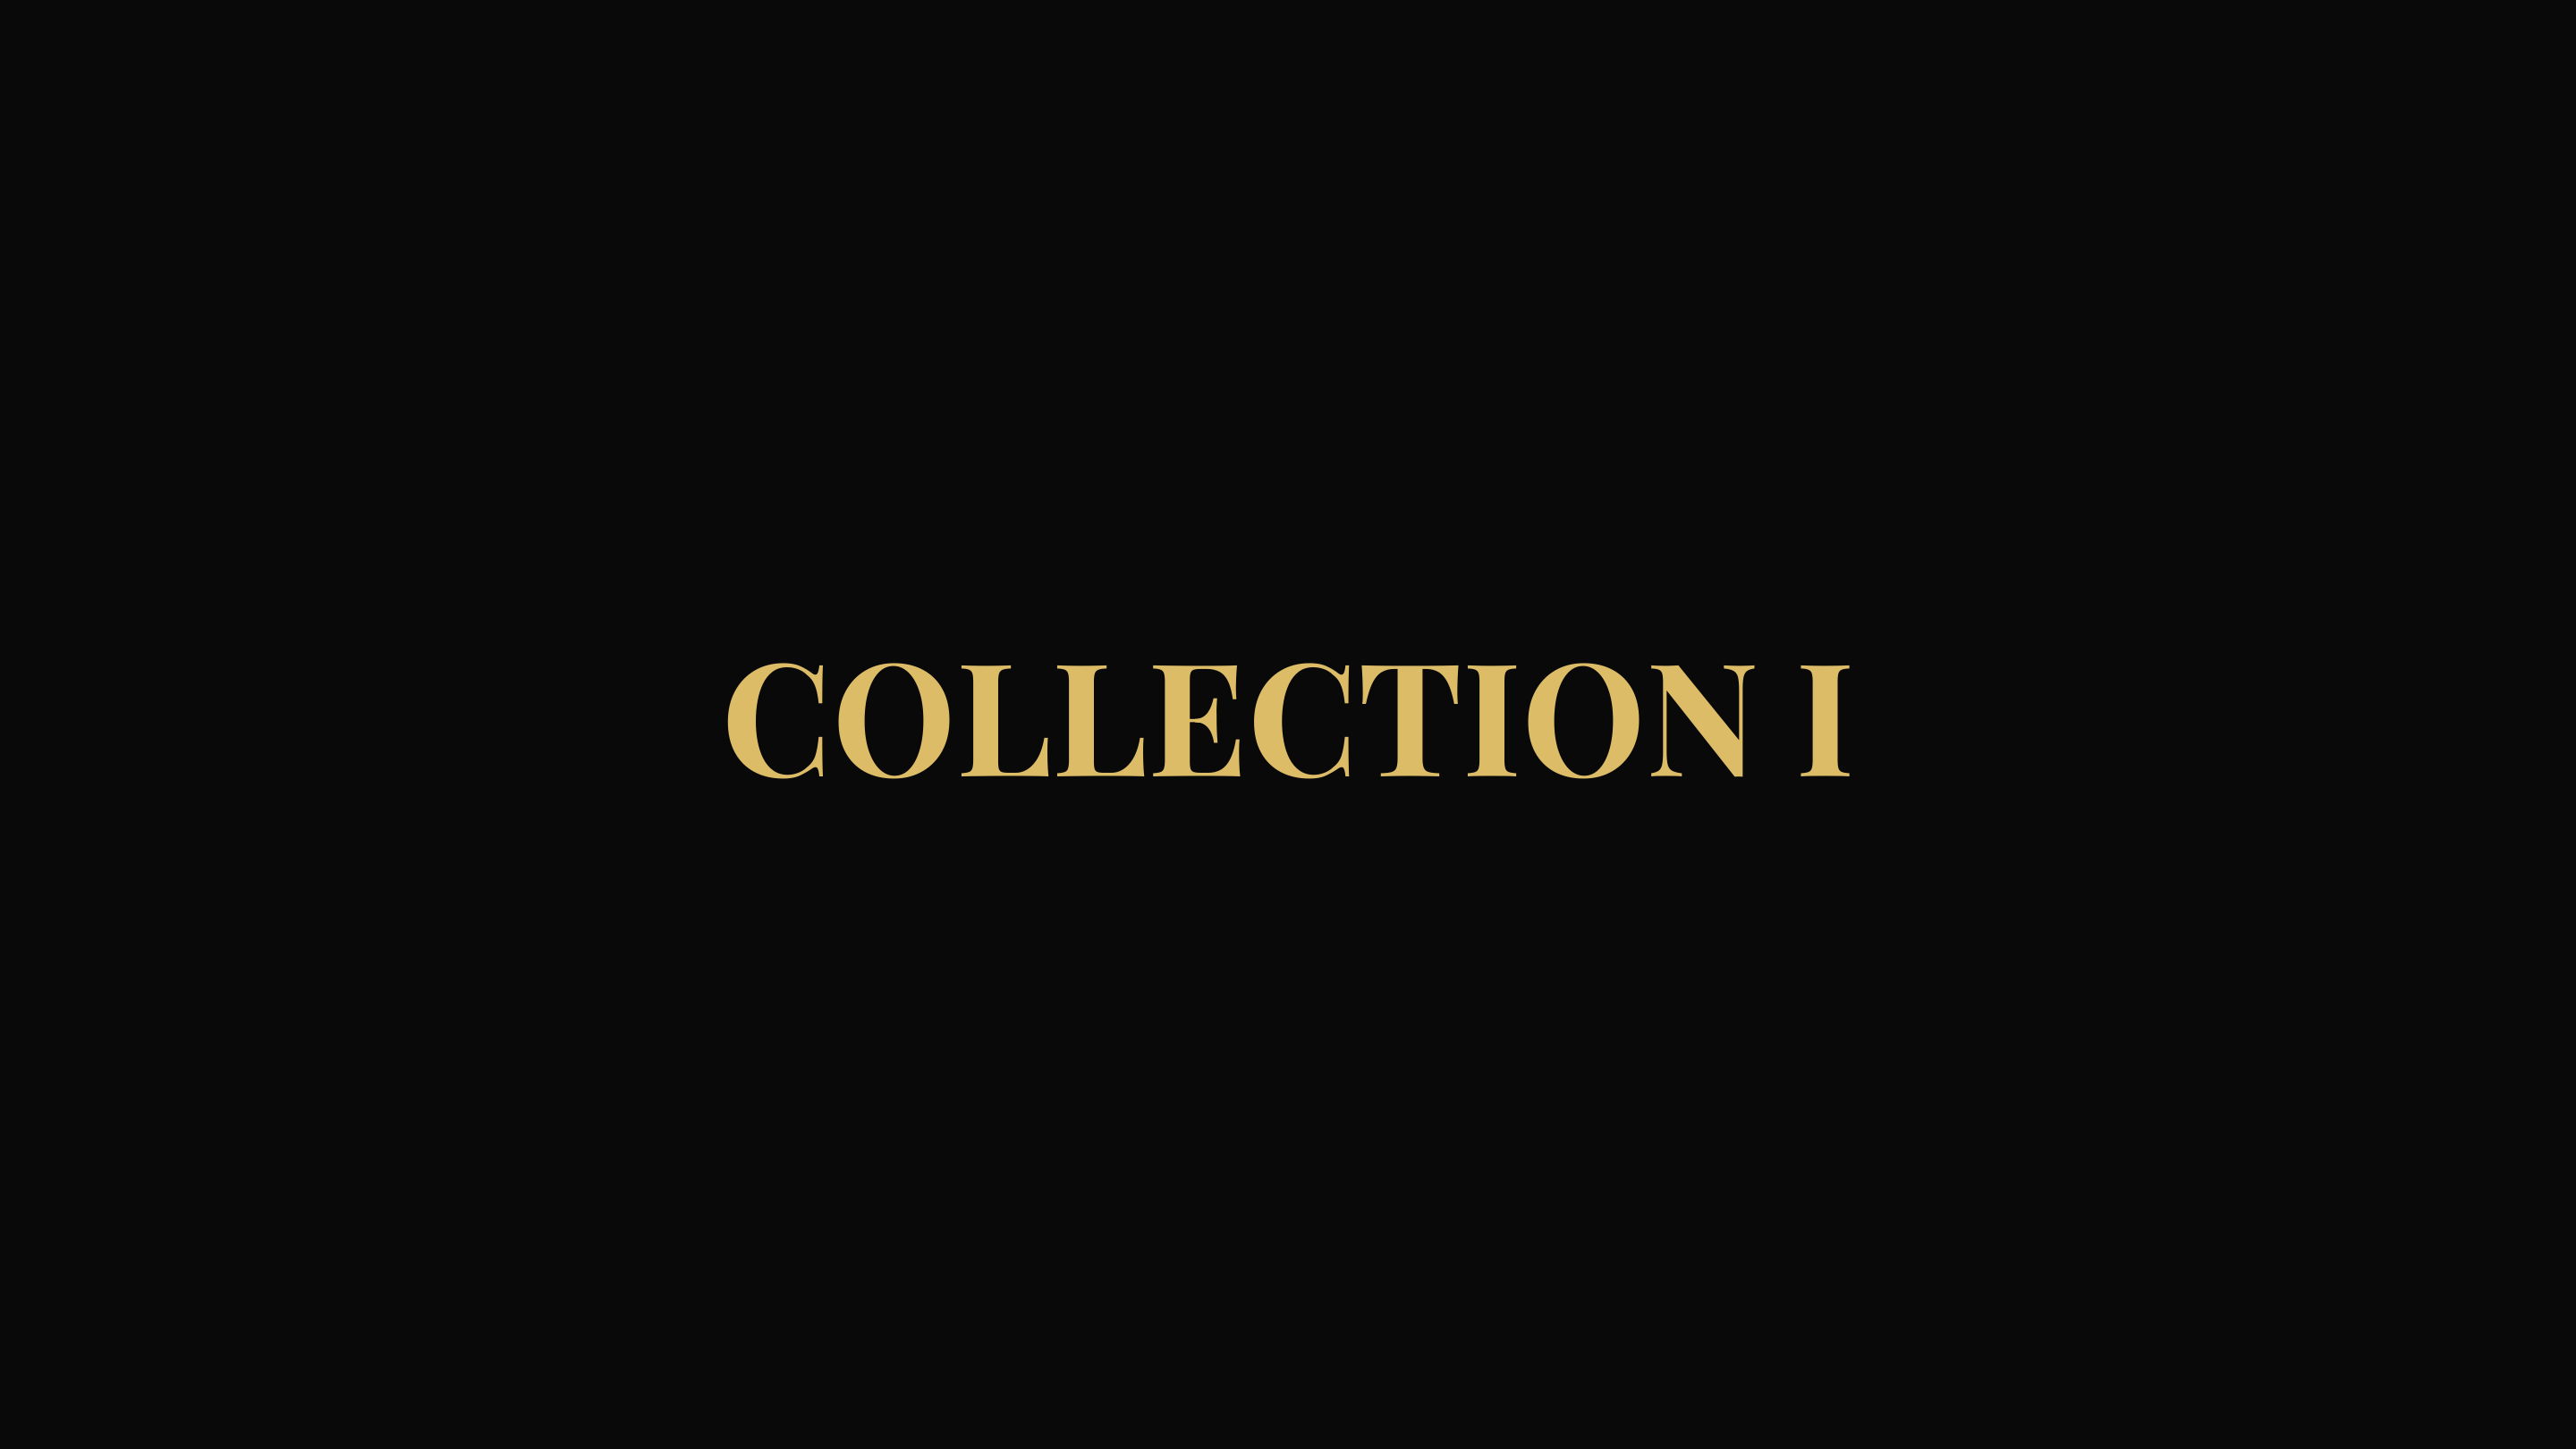 Collection I